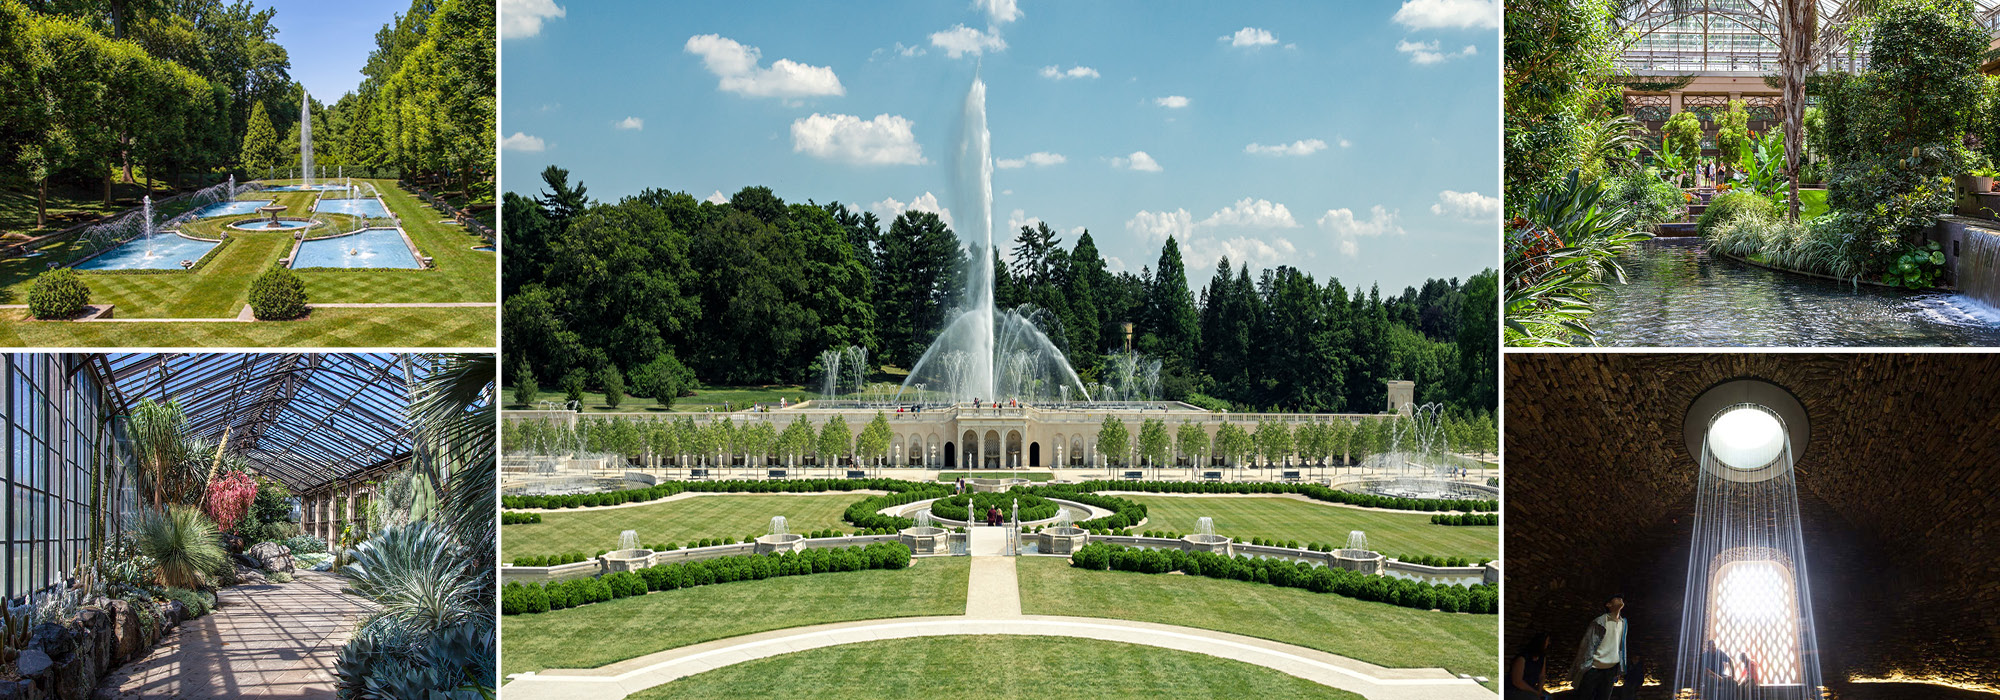 Longwood Gardens Experience A World Apart The Cultural